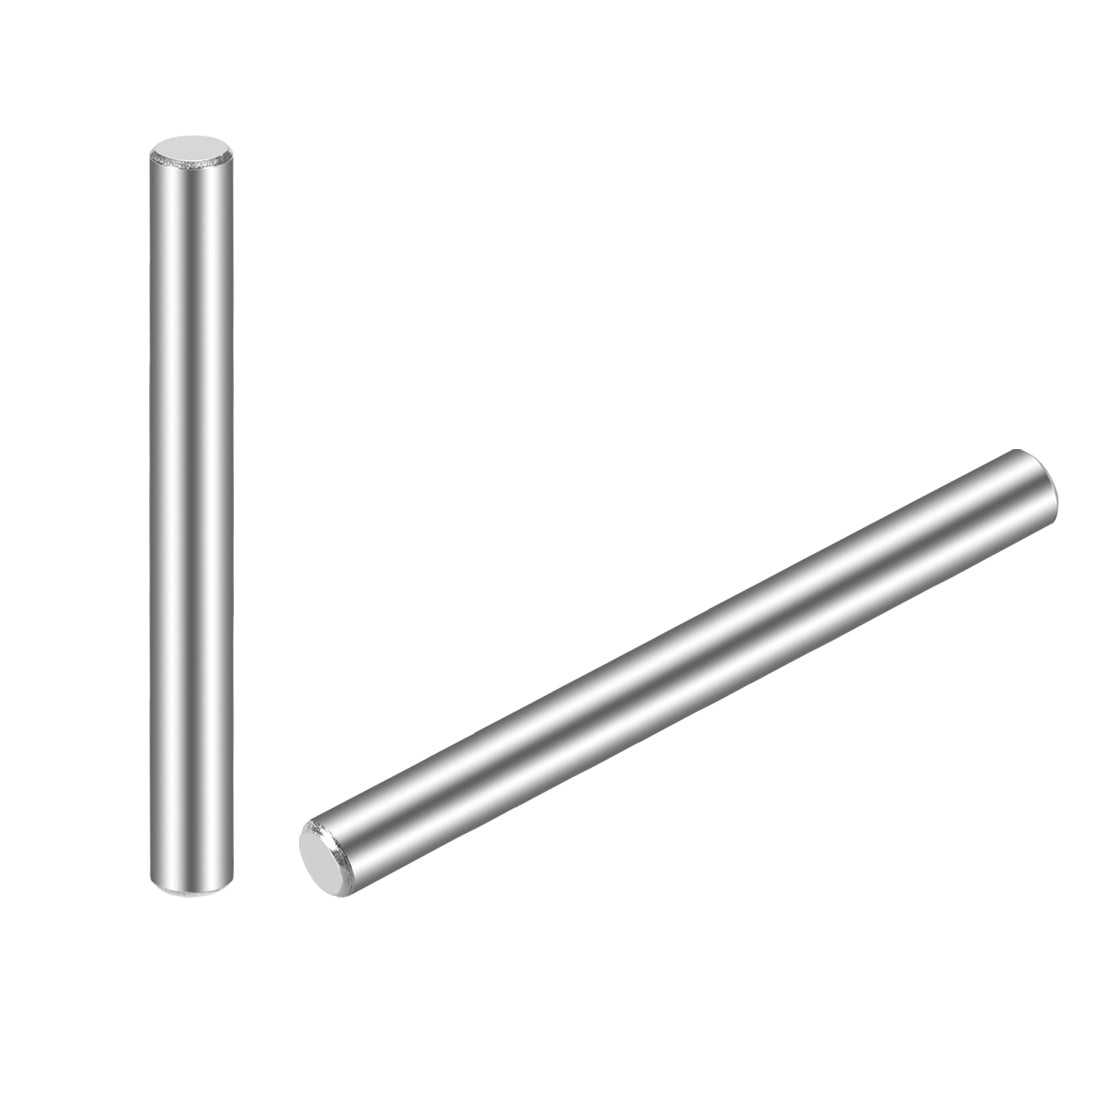 uxcell Uxcell 25Pcs Dowel Pin 304 Stainless Steel Cylindrical Shelf Support Pin